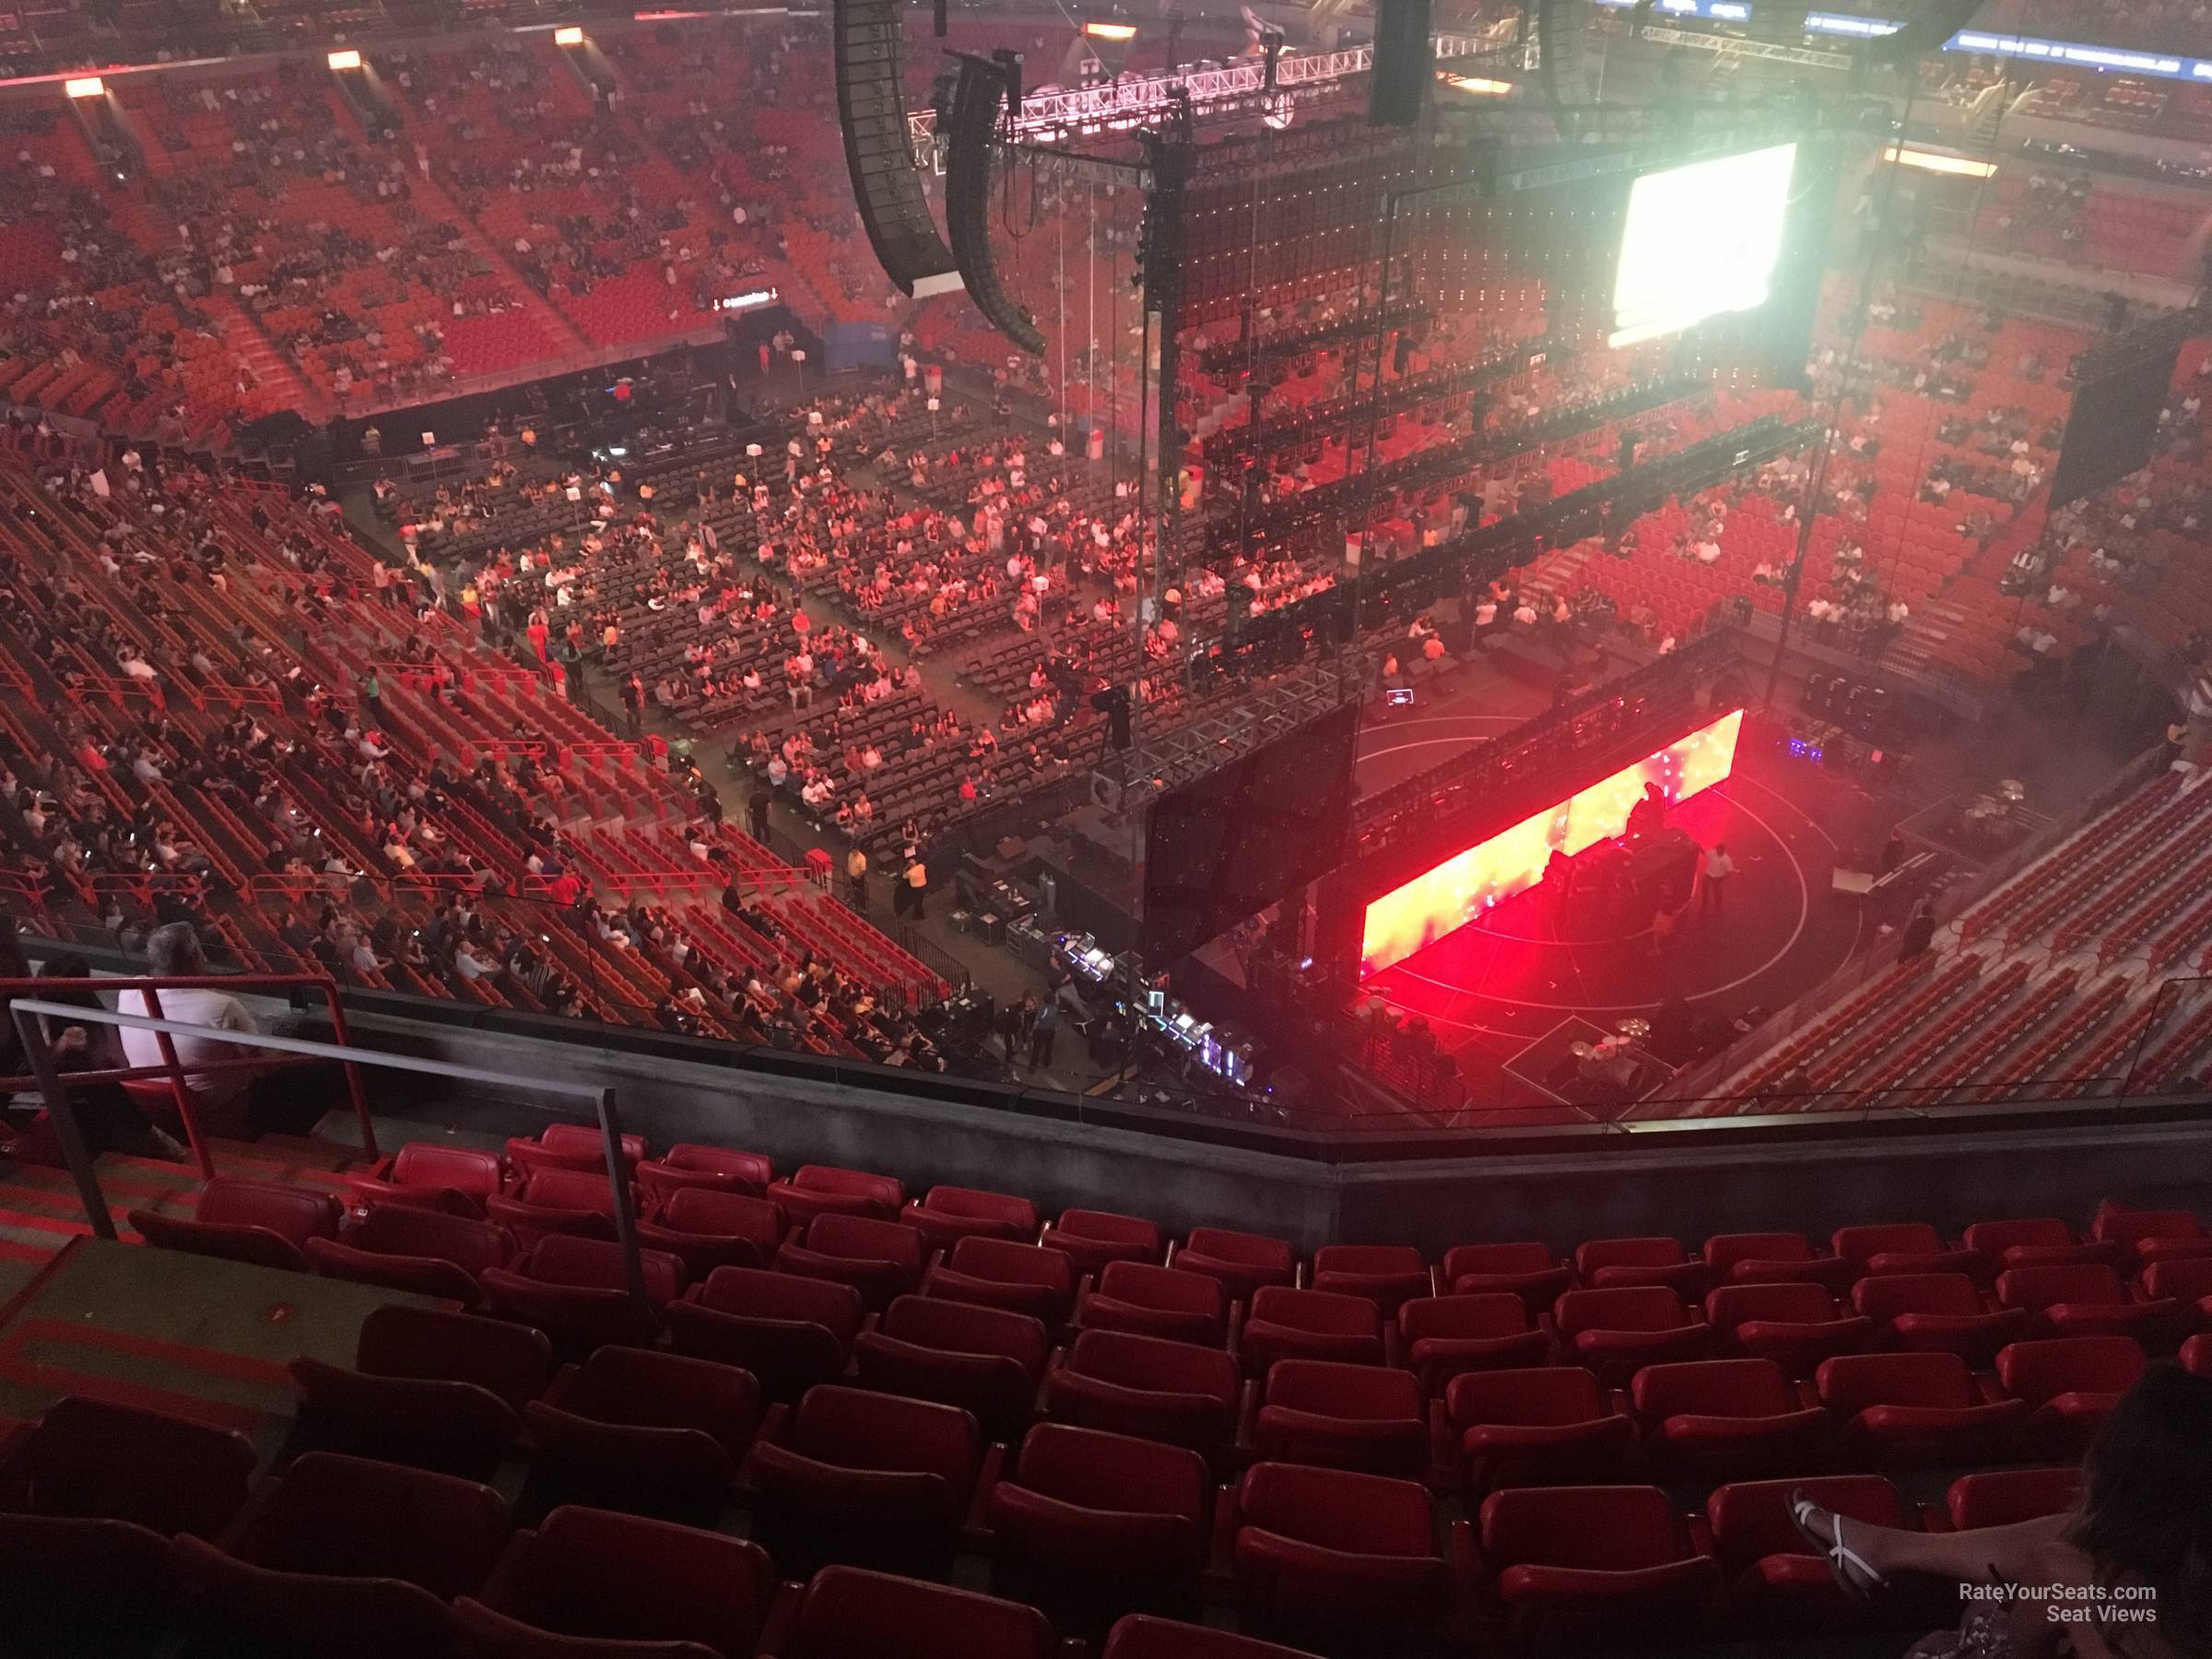 section 409, row 10 seat view  for concert - miami-dade arena